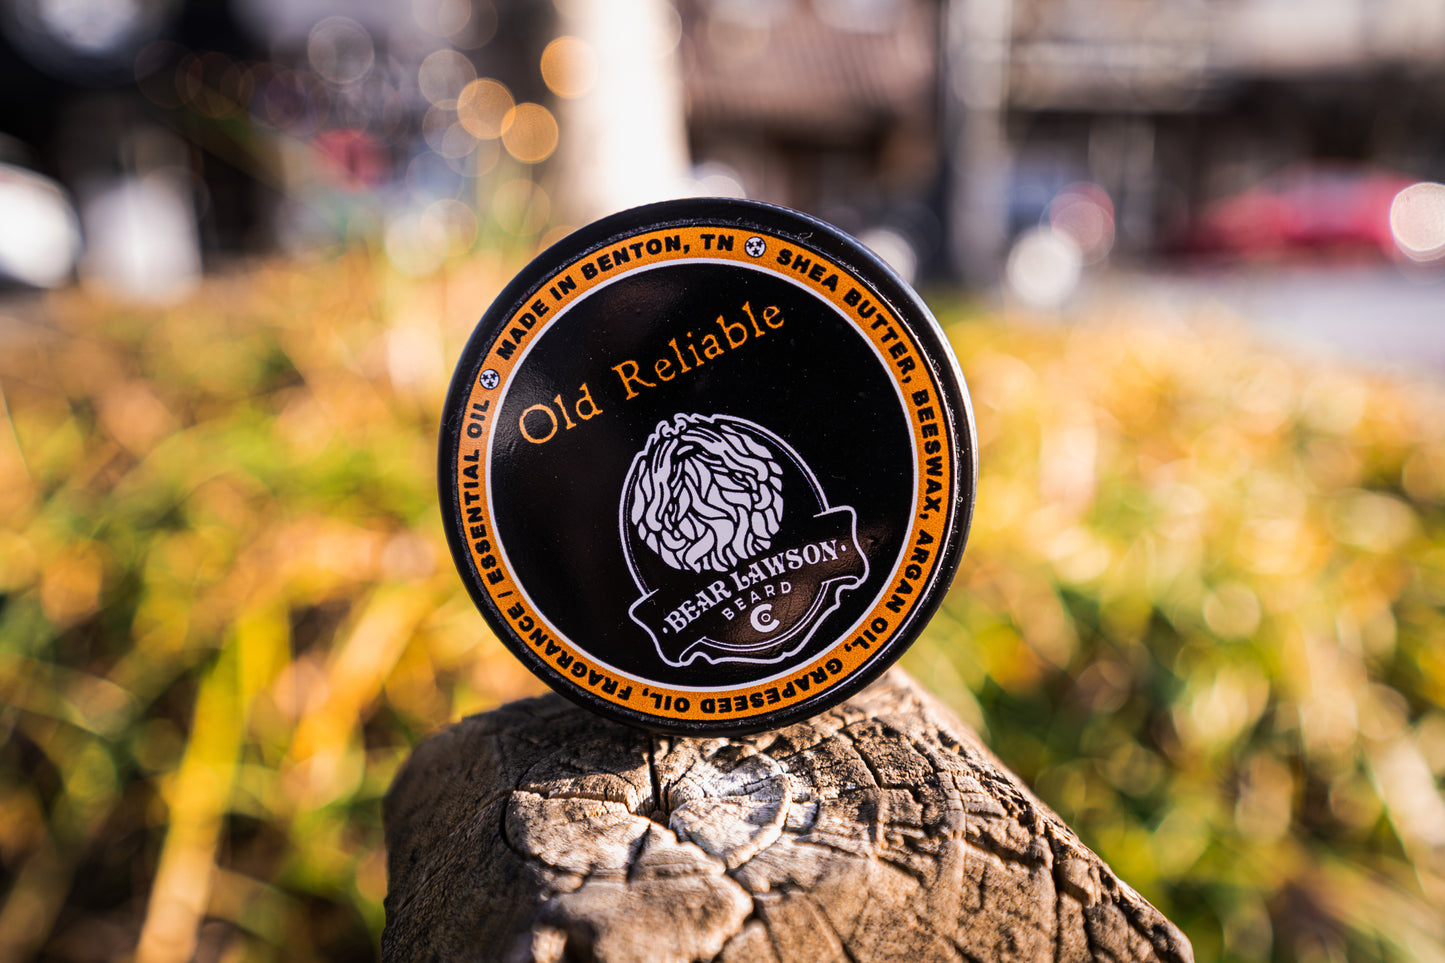 Beard Butter - Old Reliable